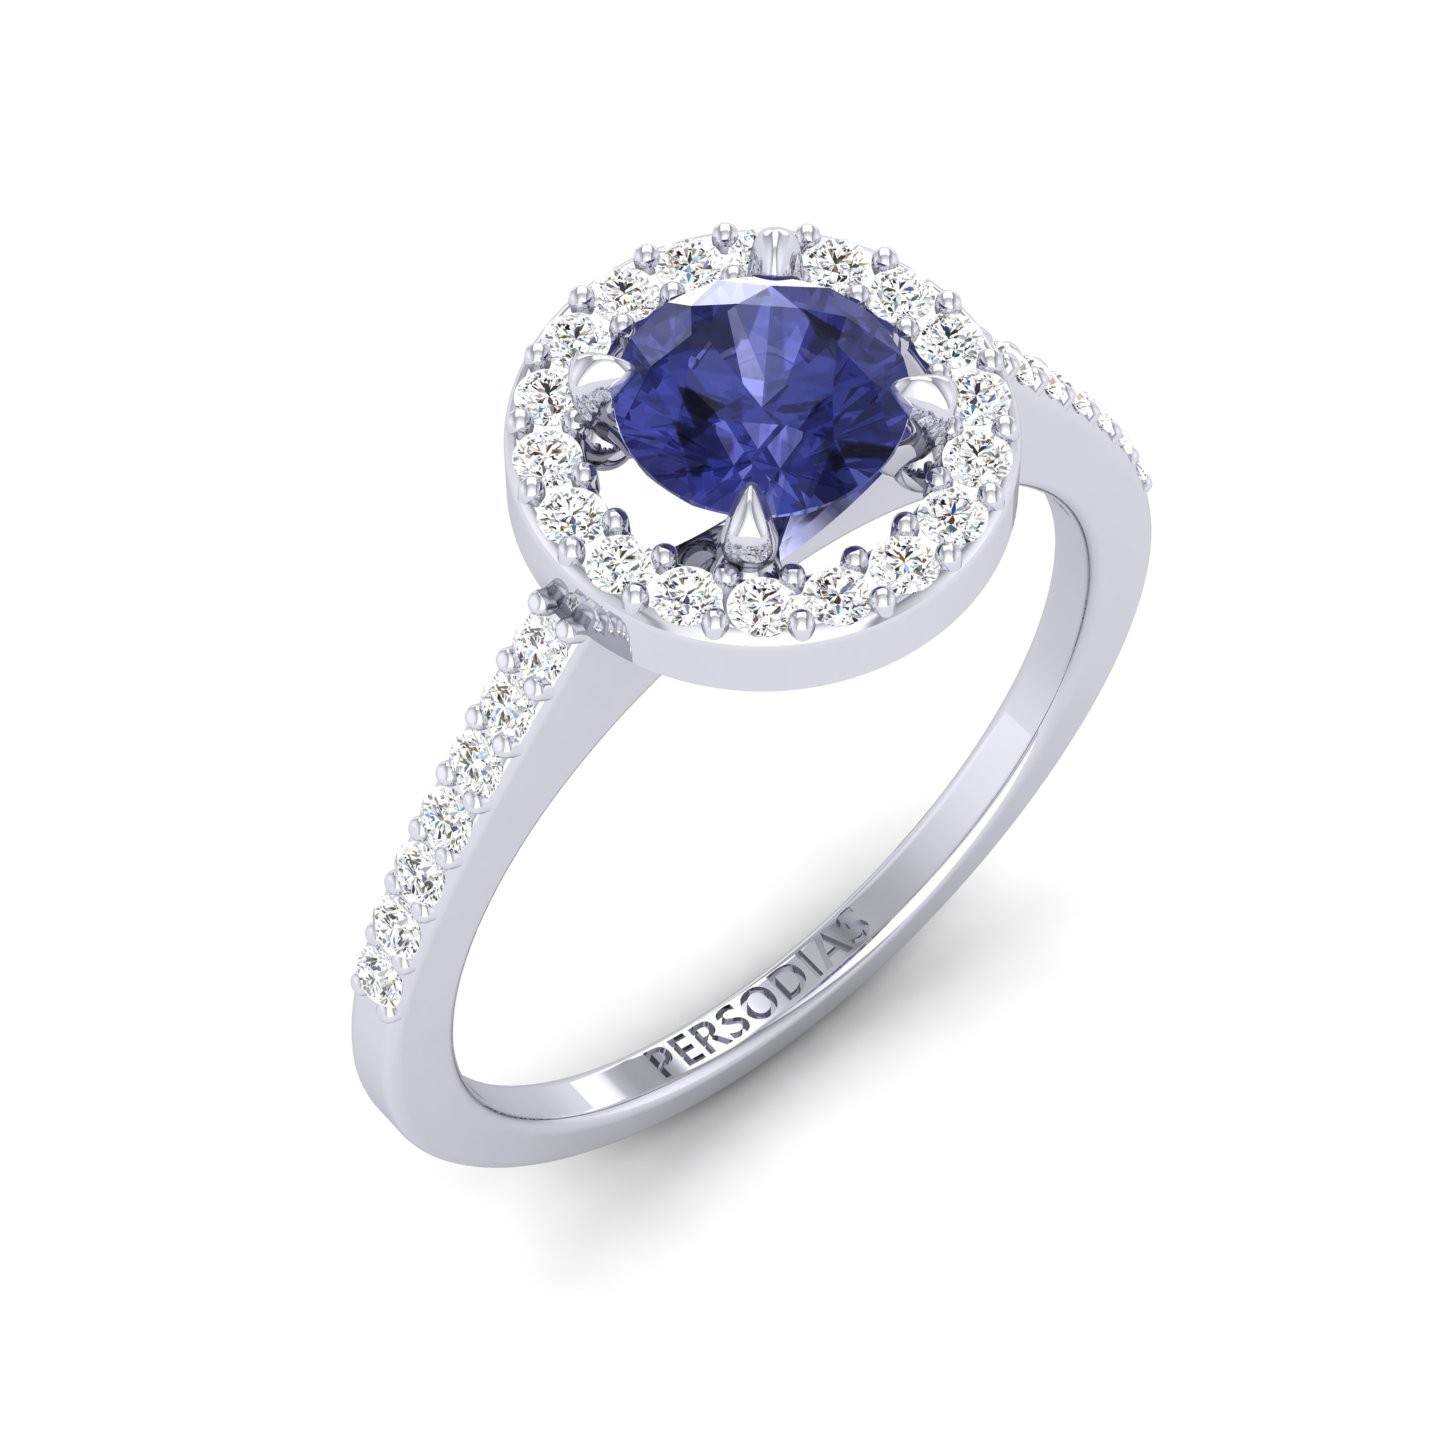 Halo Engagement Ring Semi Precious Stone Round Cut 0.77 Ct Becky